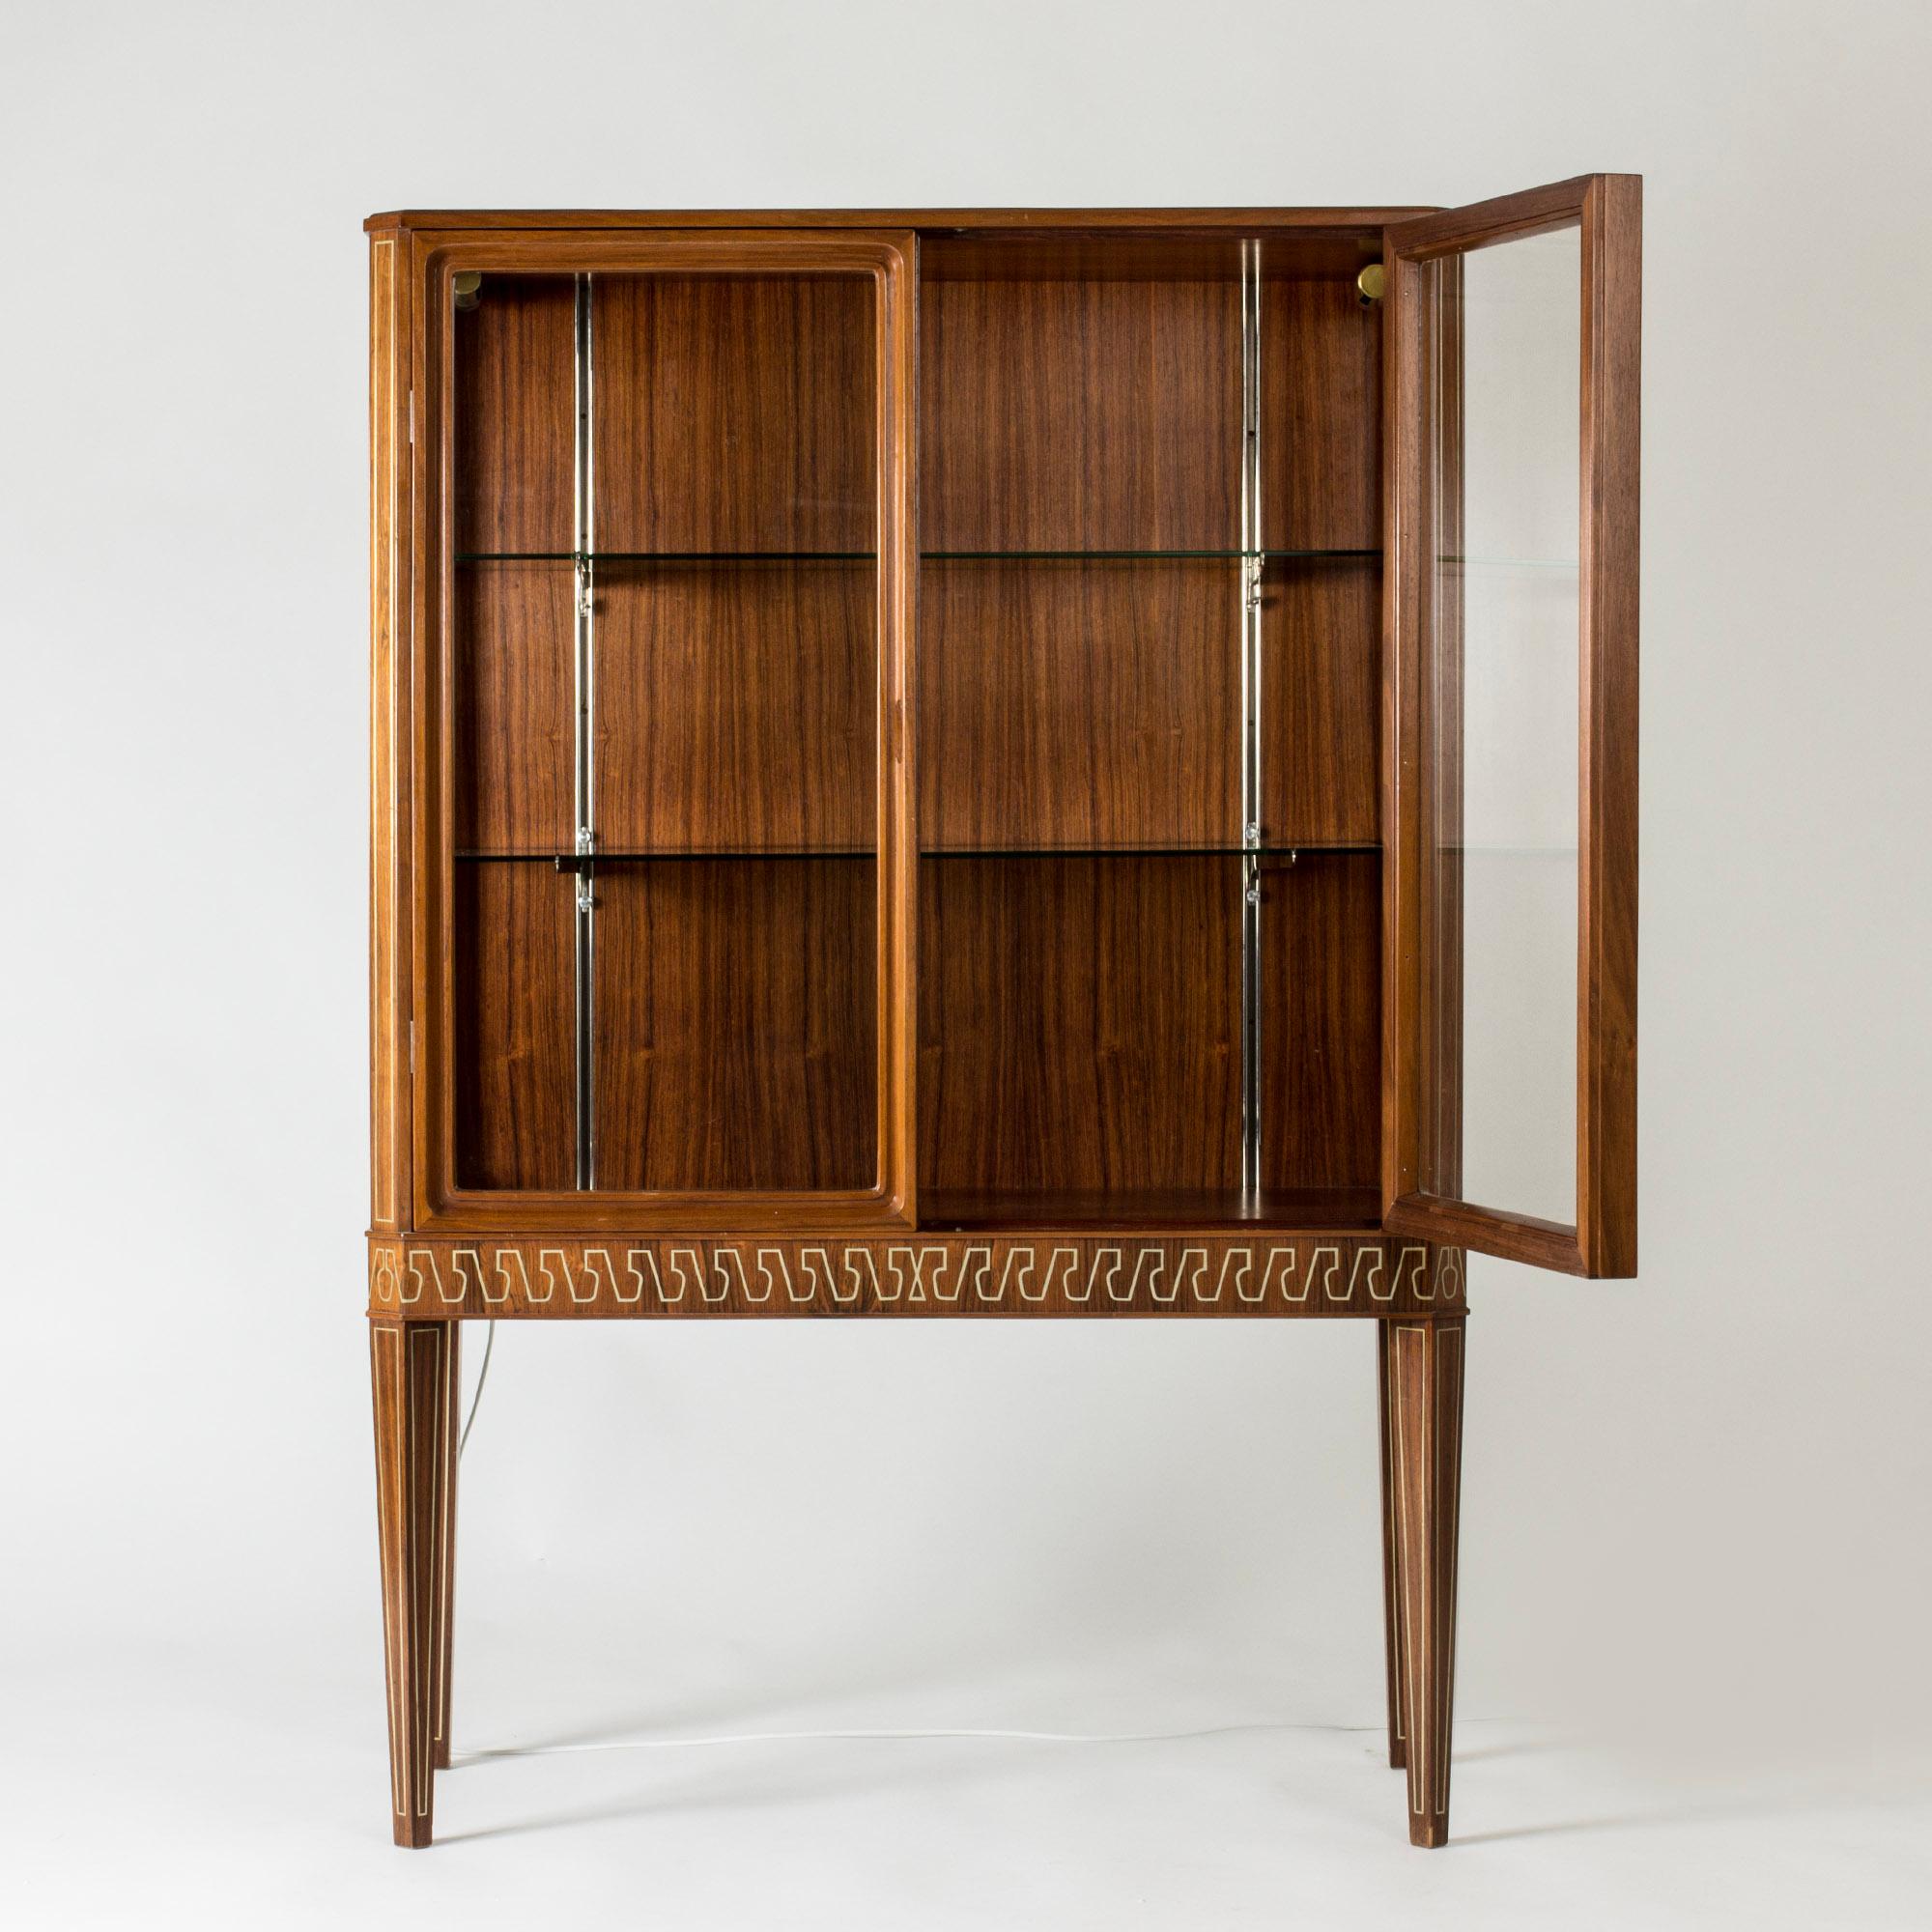 Beautiful Swedish Modern vitrine cabinet, made from rosewood with glass fronts. Elegant, graphic inlayed band along the bottom edge, made in brass. Brass decor on the legs and corners. Perfect for a cherished collection of beautiful things.